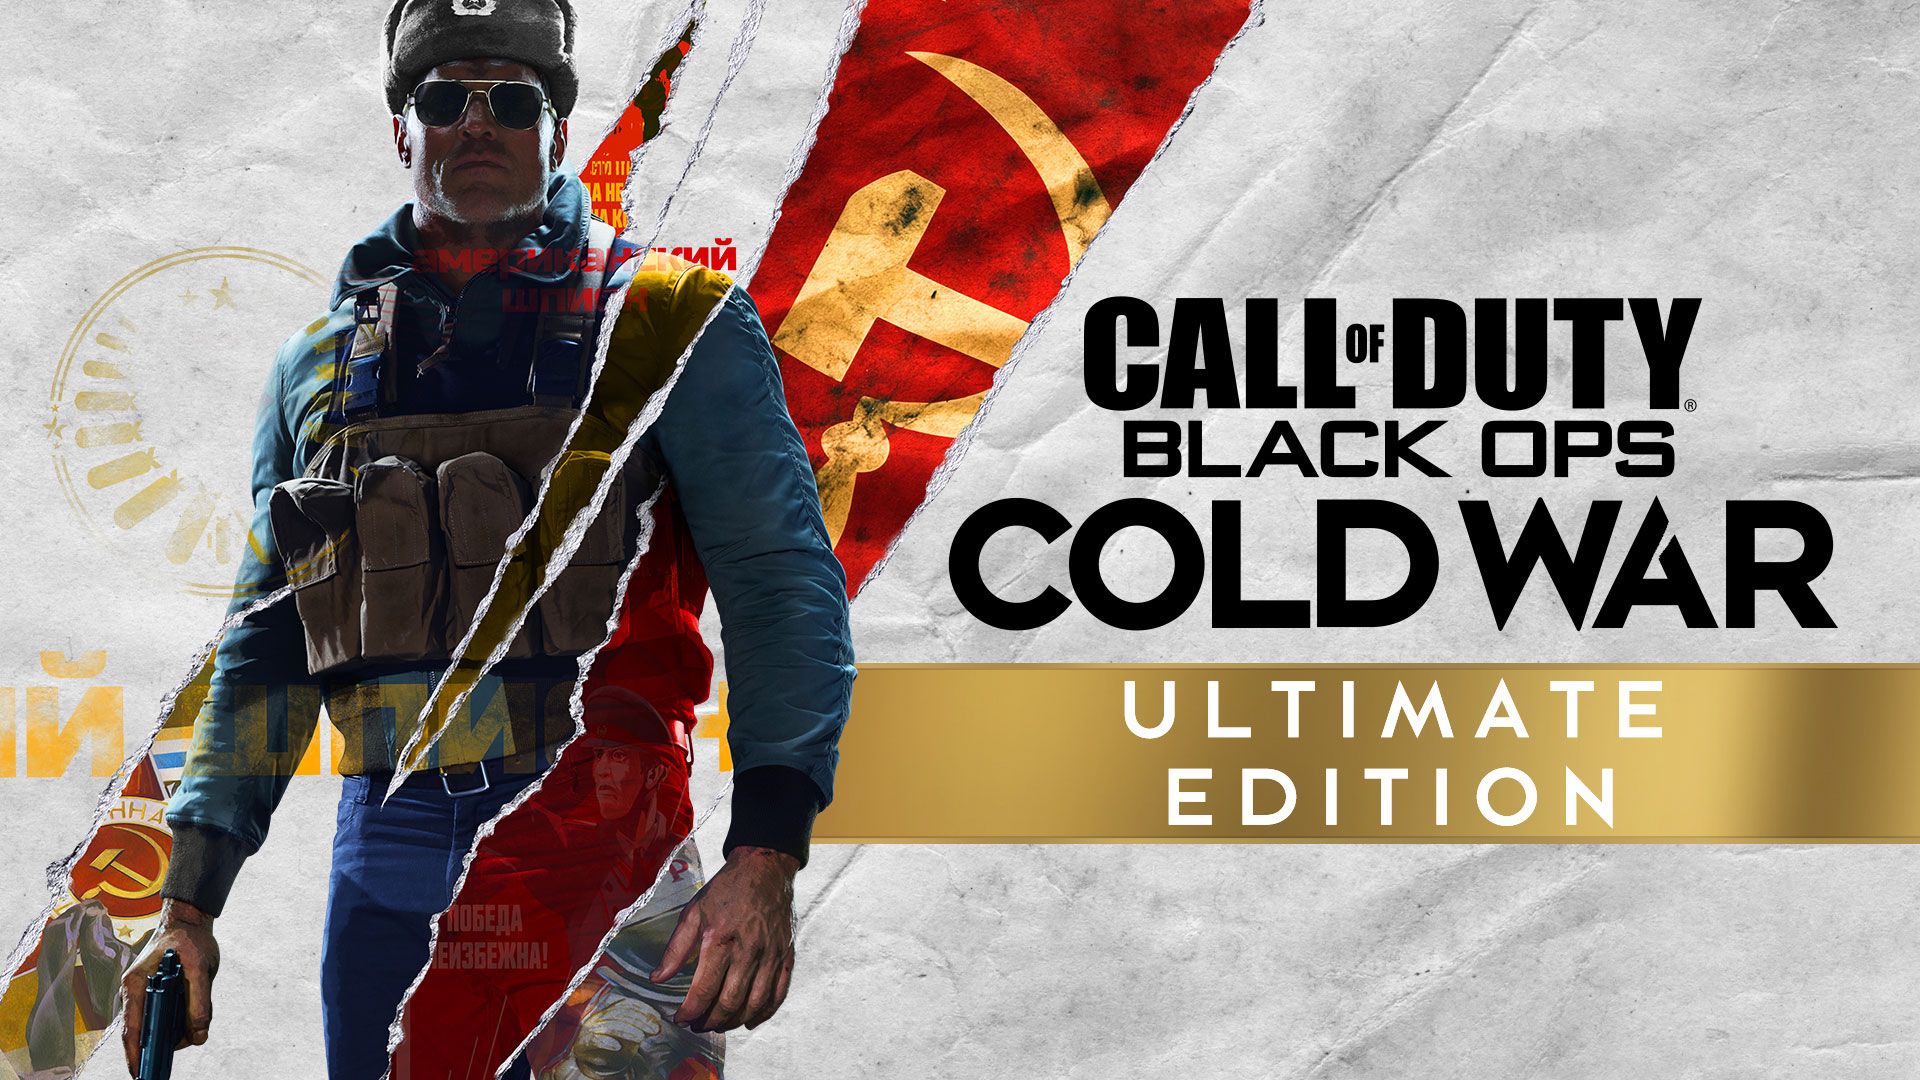 Announcement – Call of Duty®: Black Ops Cold War Editions Detailed, Available for Pre